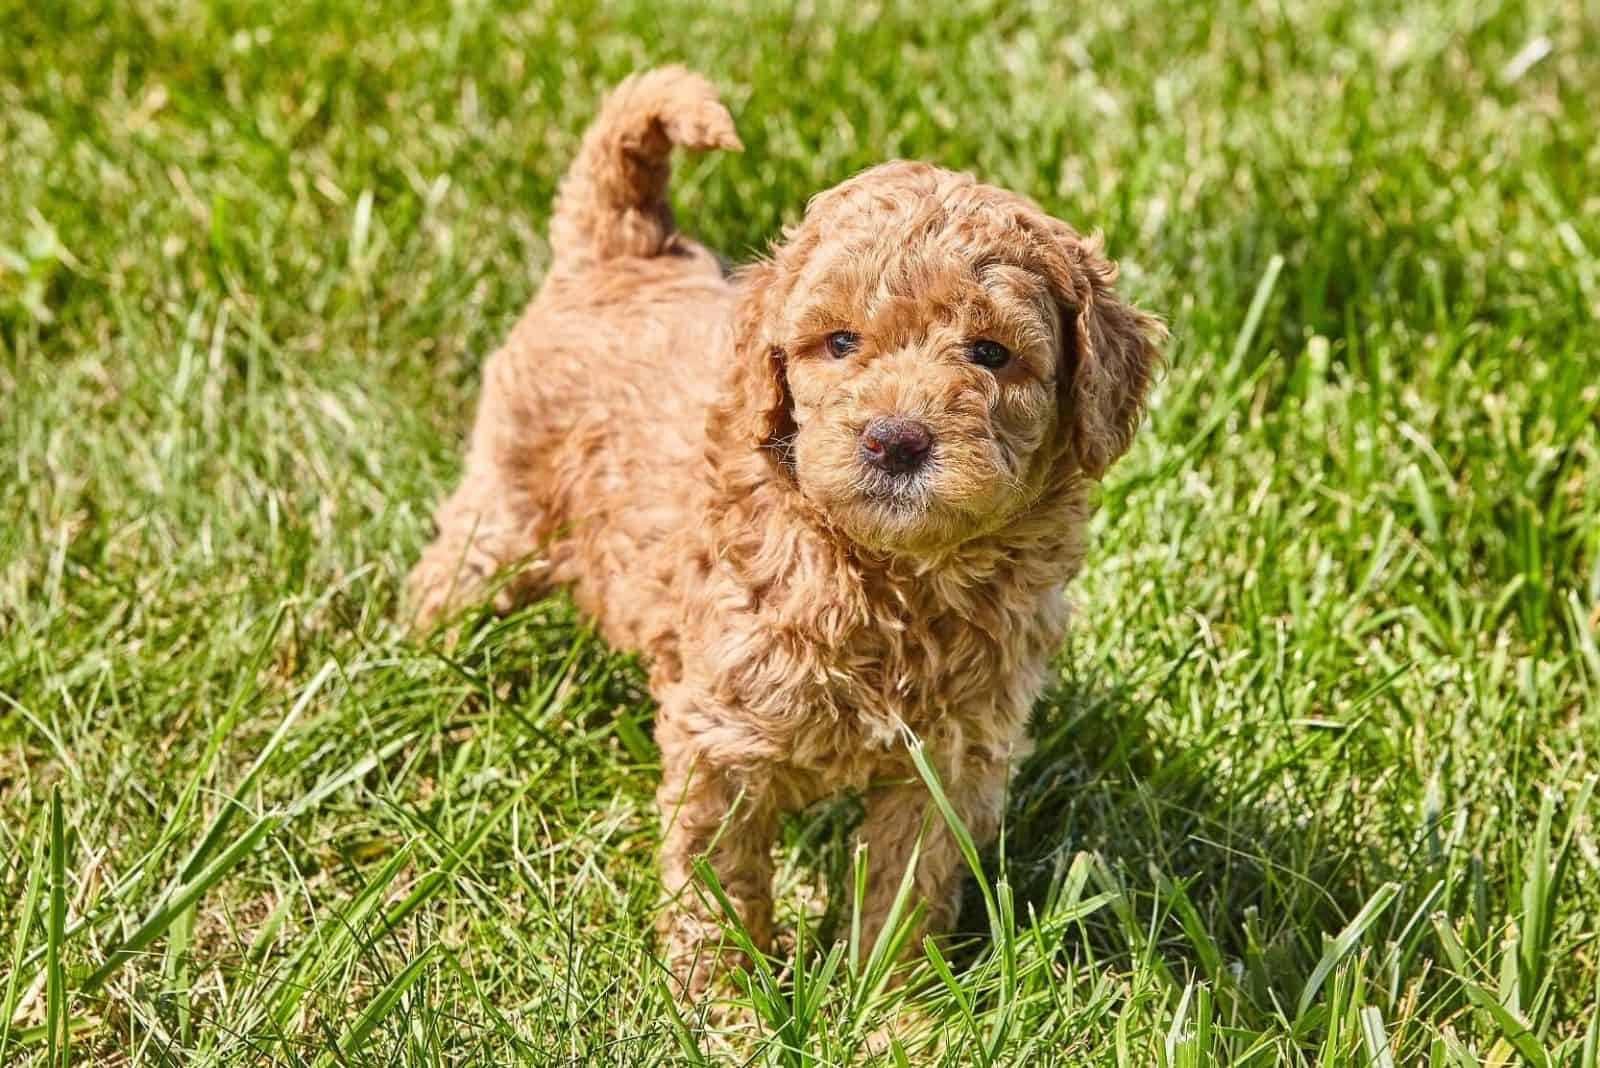 F1 Mini Goldendoodle: All About This Adorable Dog